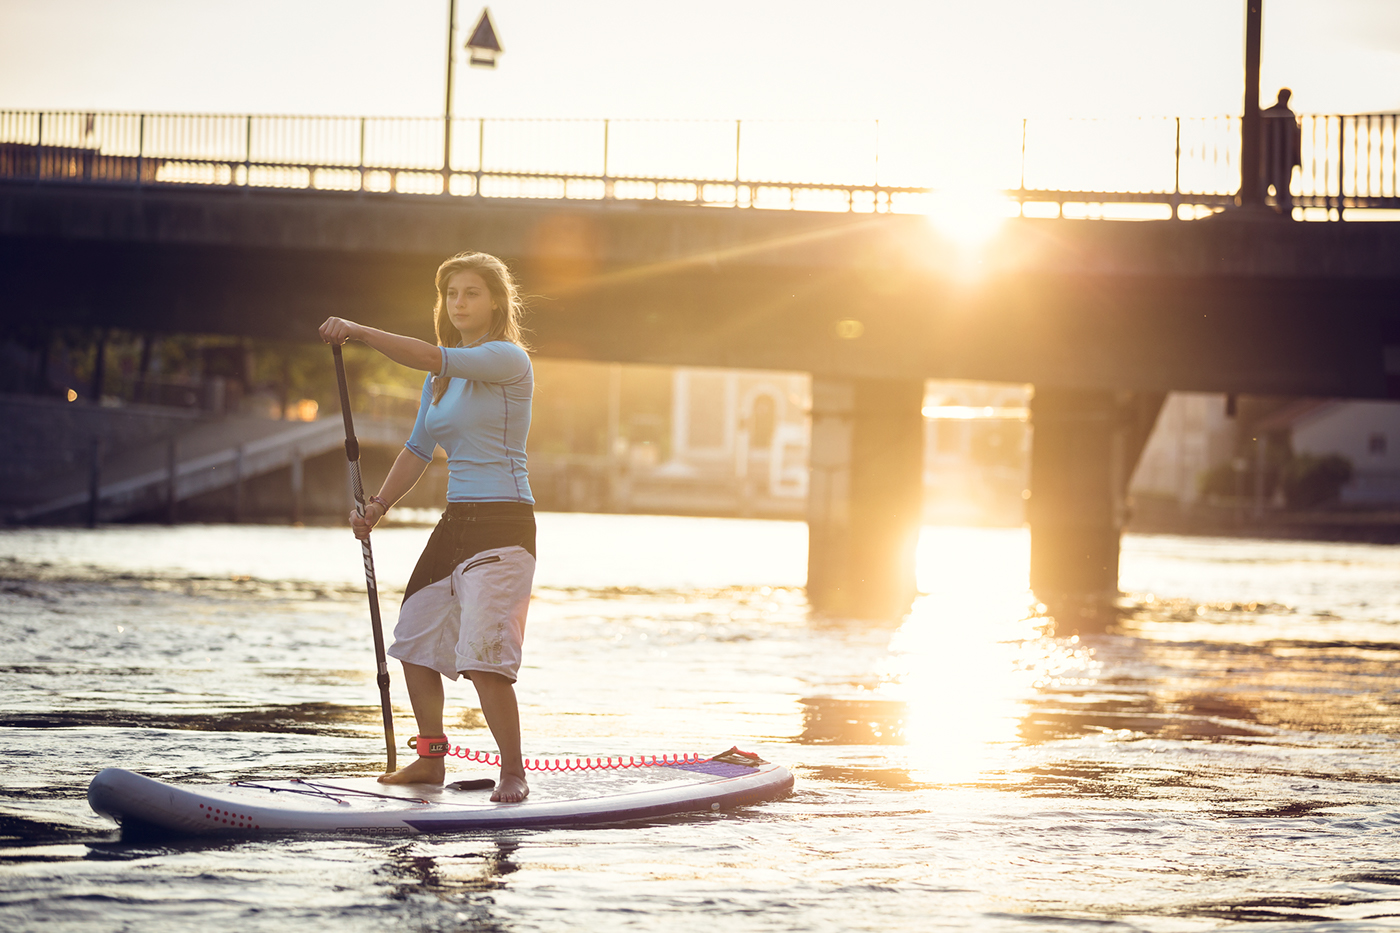 lifestyle SUP Paddle Active Watersports paddleboard sport advertisement Urban water shoot location girl pinup athlete pro instructor